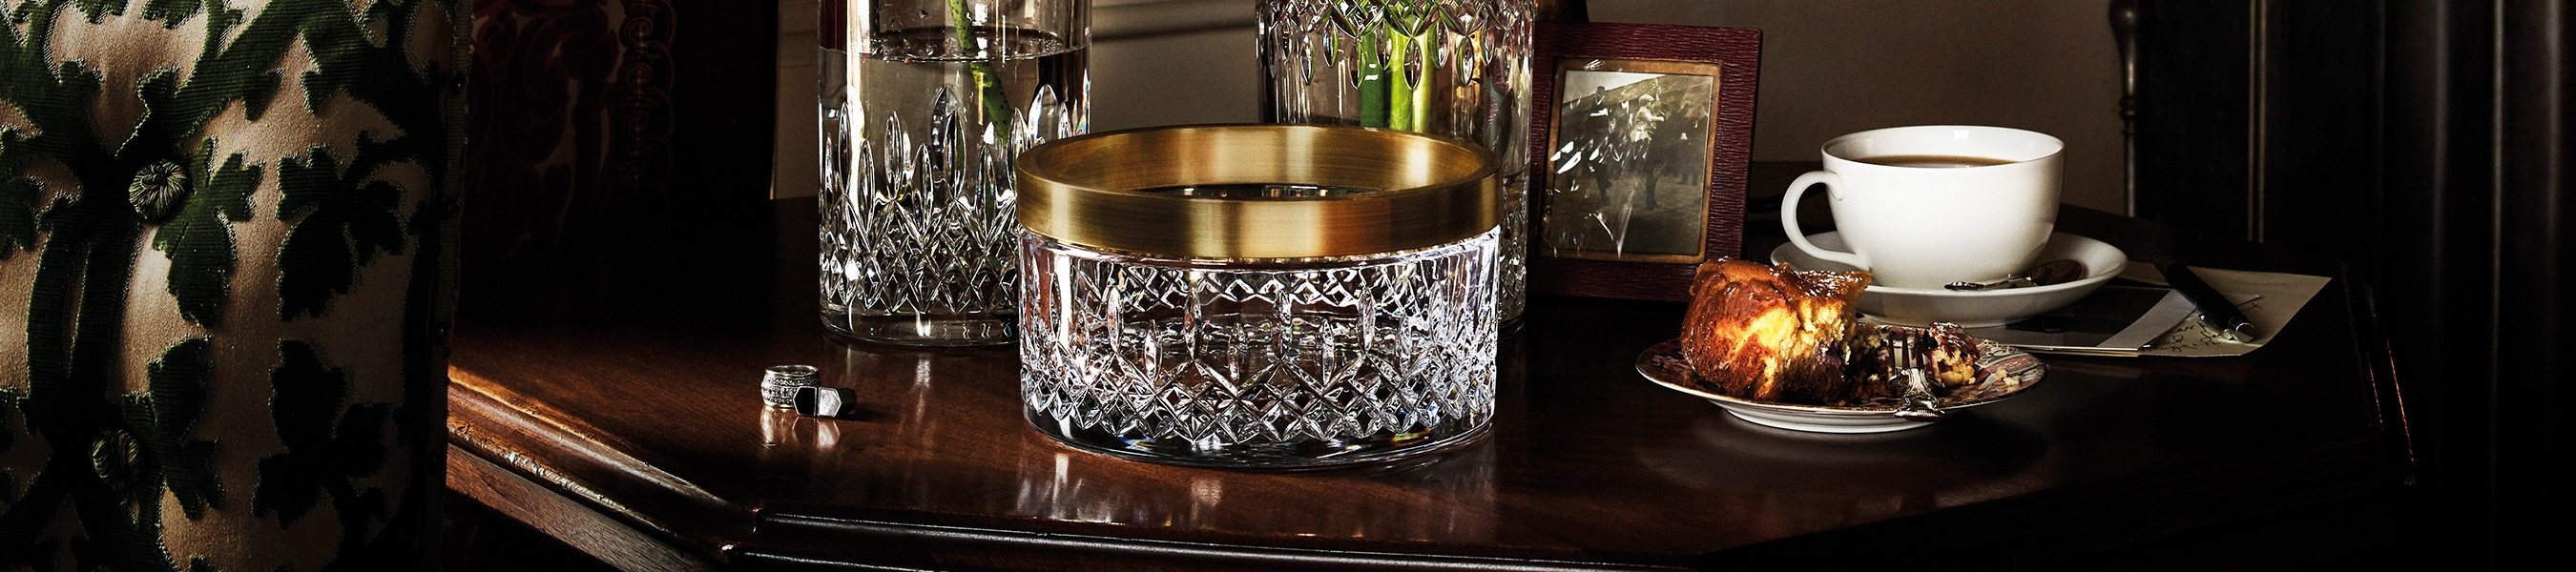 27 Stylish Marquis by Waterford Newberry Vase 10 2024 free download marquis by waterford newberry vase 10 of crystal bowls centerpieces waterforda us regarding waterford crystal bowls centerpieces